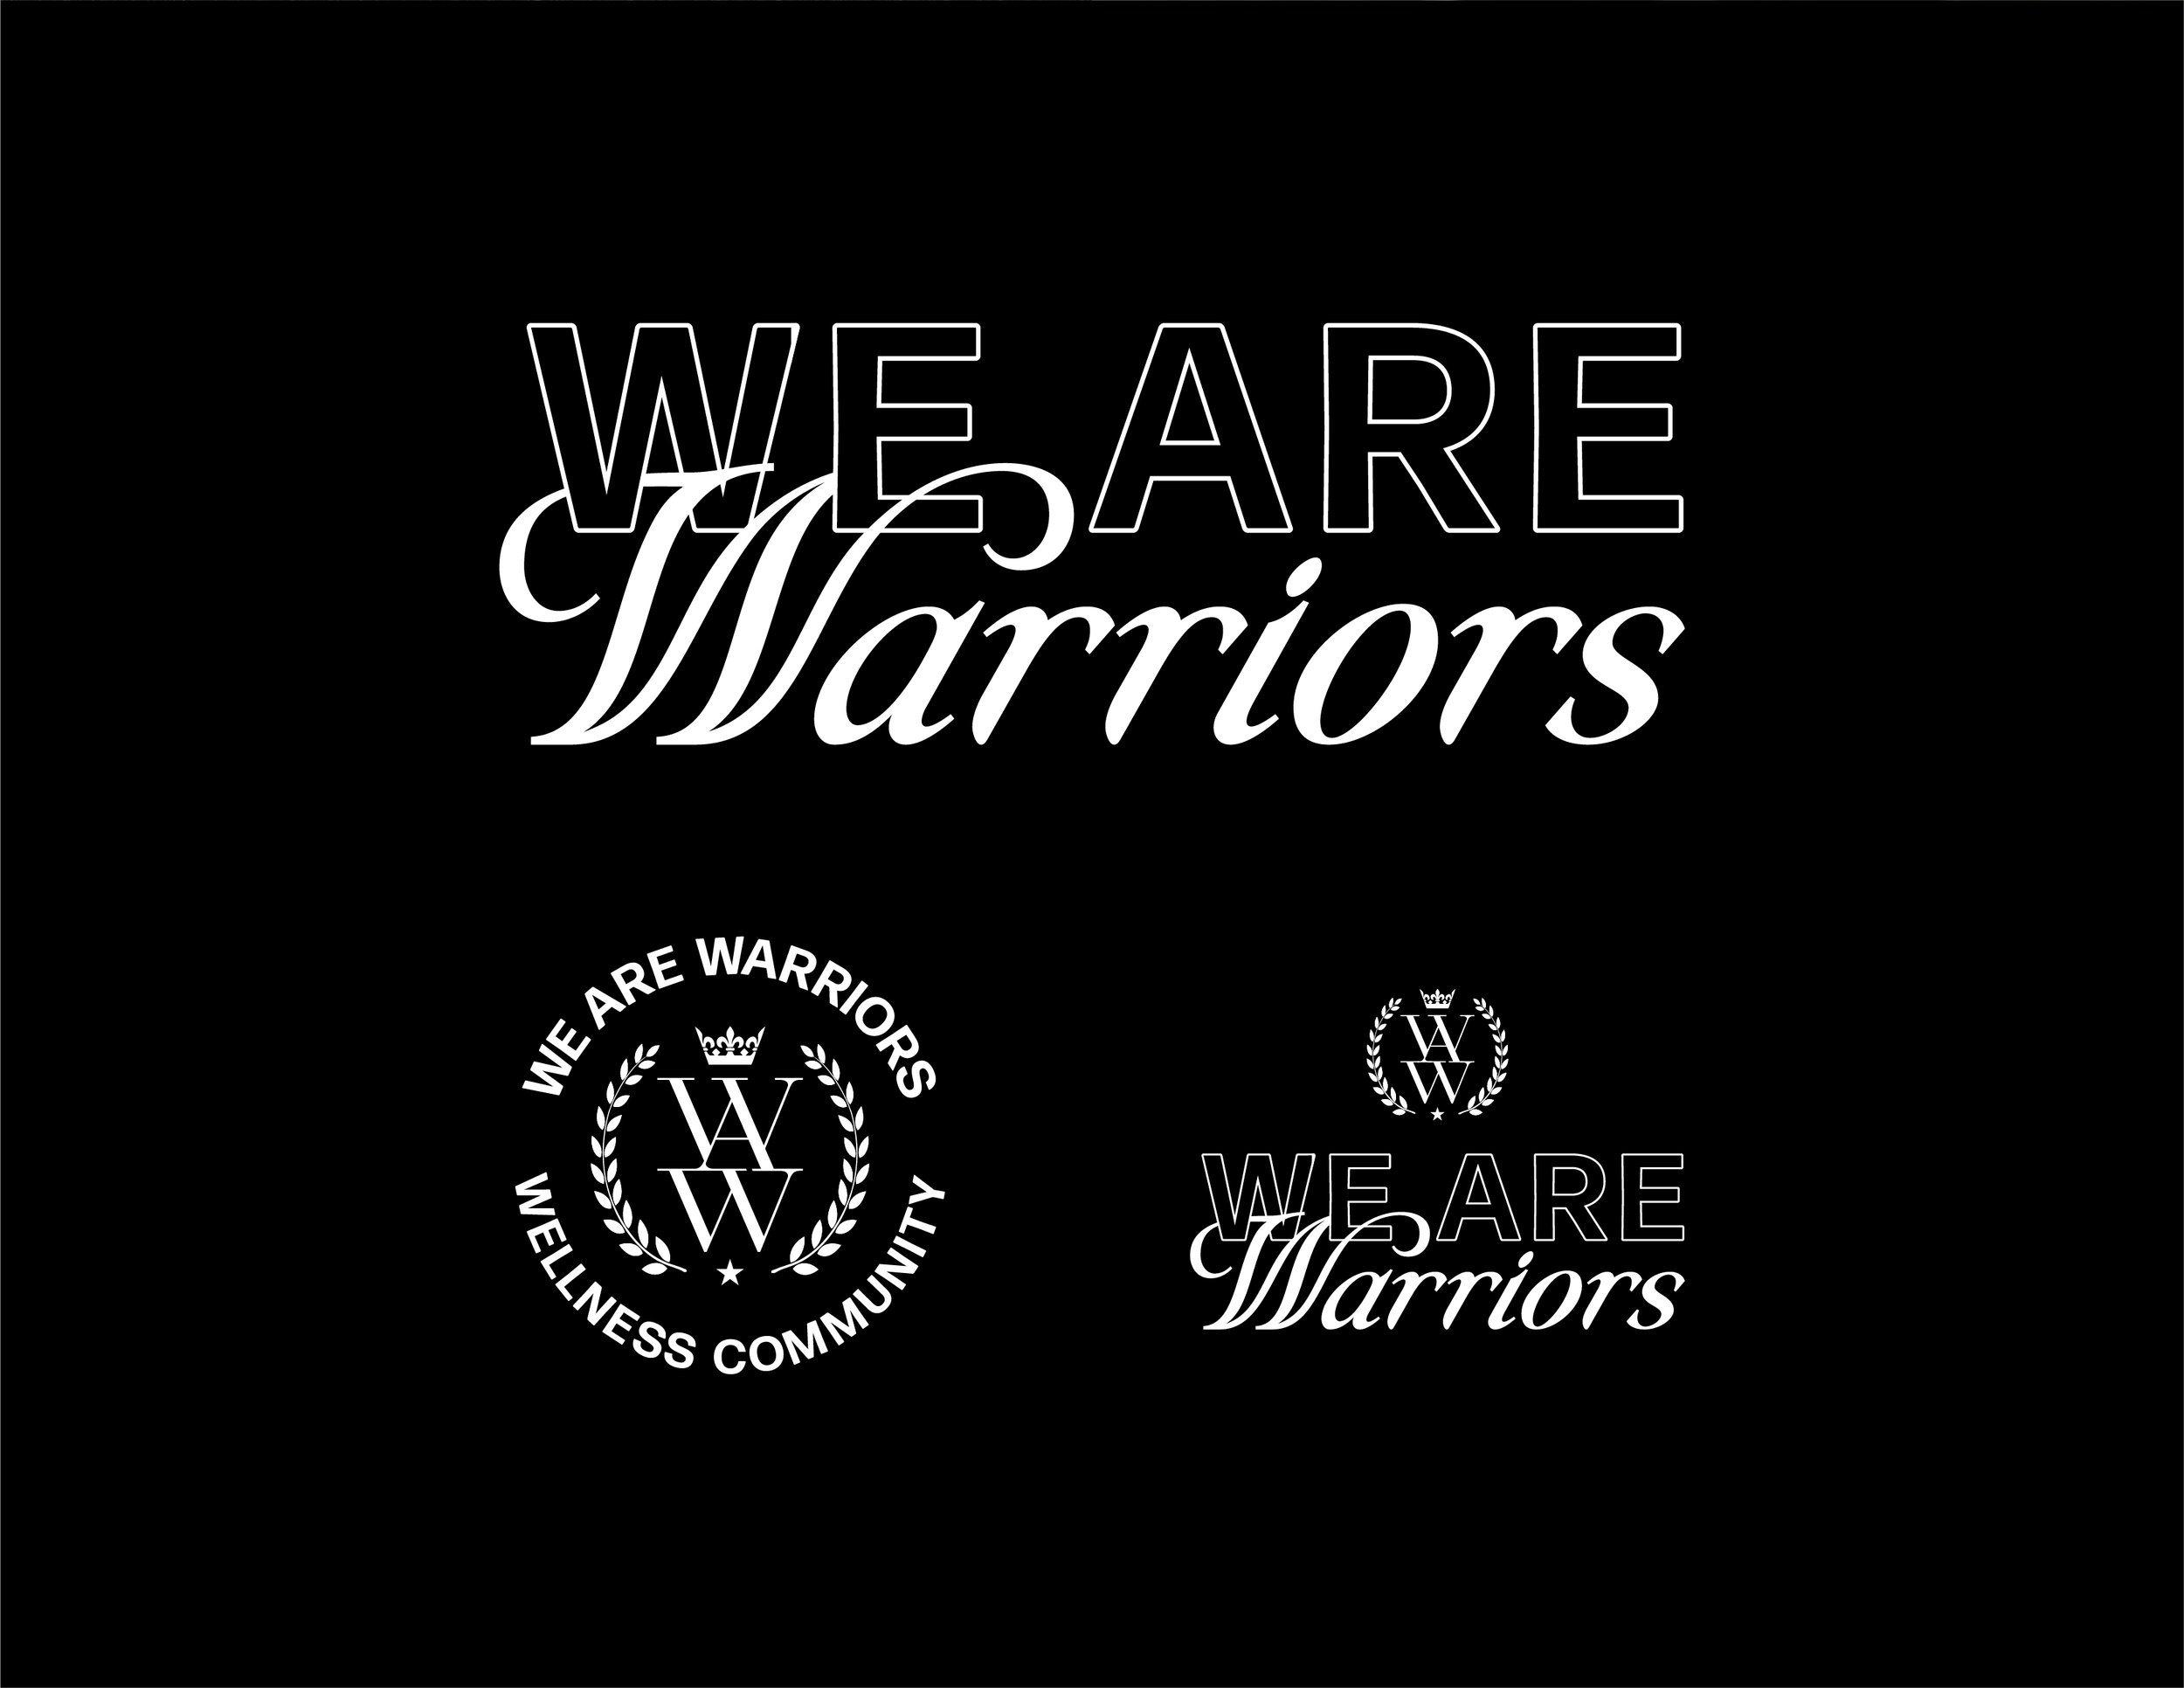 We are Warriors